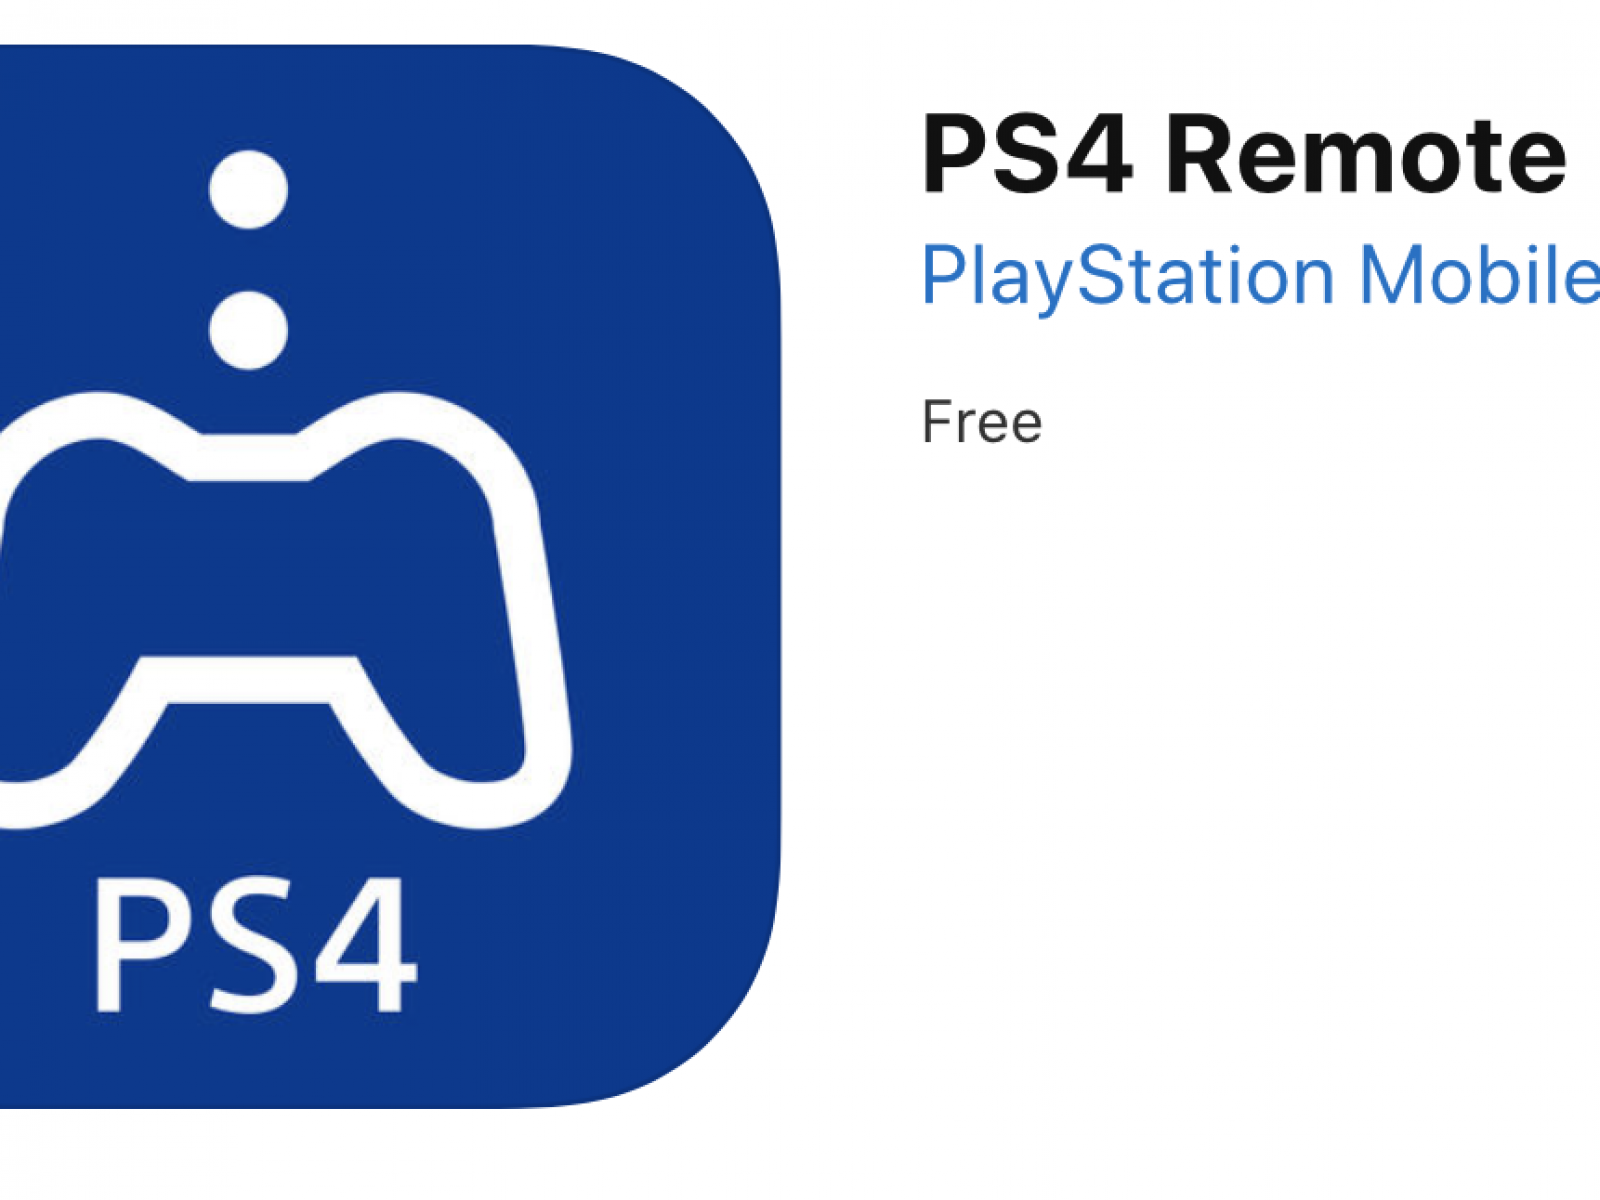 PS4 Remote Play For To Stream PS4 Games on Your iPhone or iPad